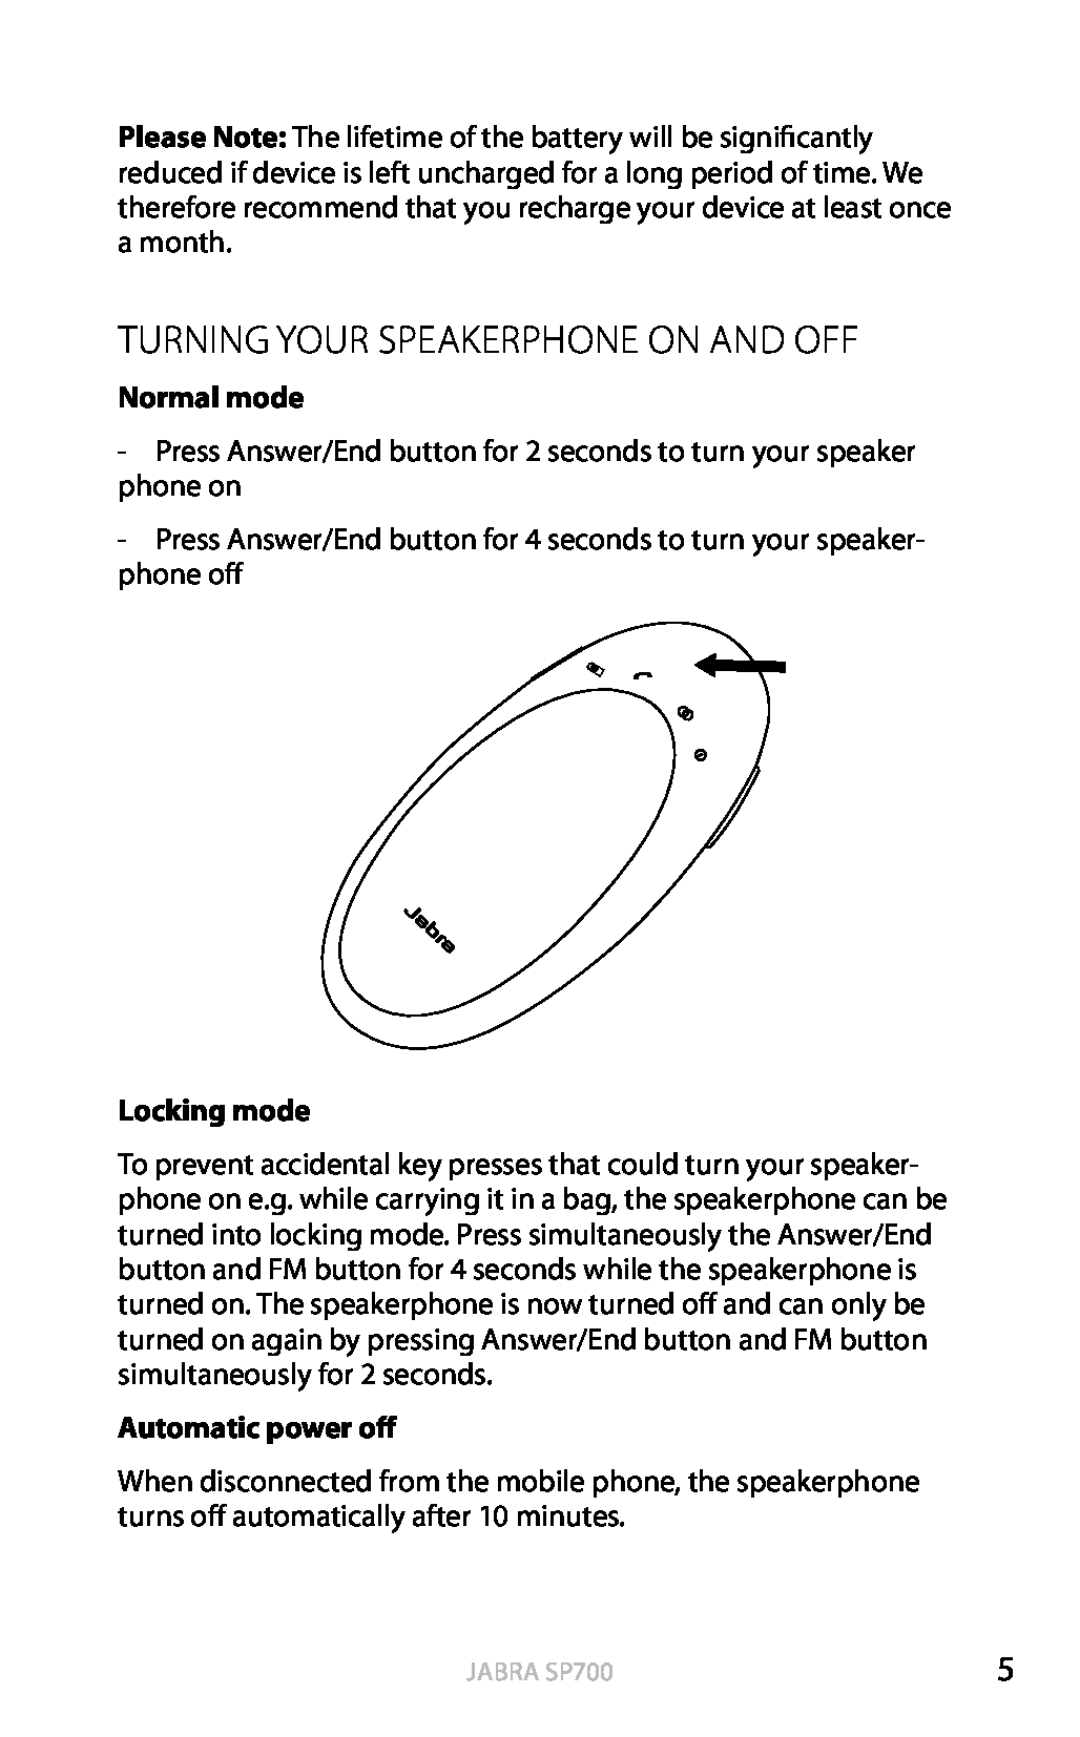 Jabra SP700 user manual Turning your Speakerphone on and off, Normal mode, Locking mode, Automatic power off, english 